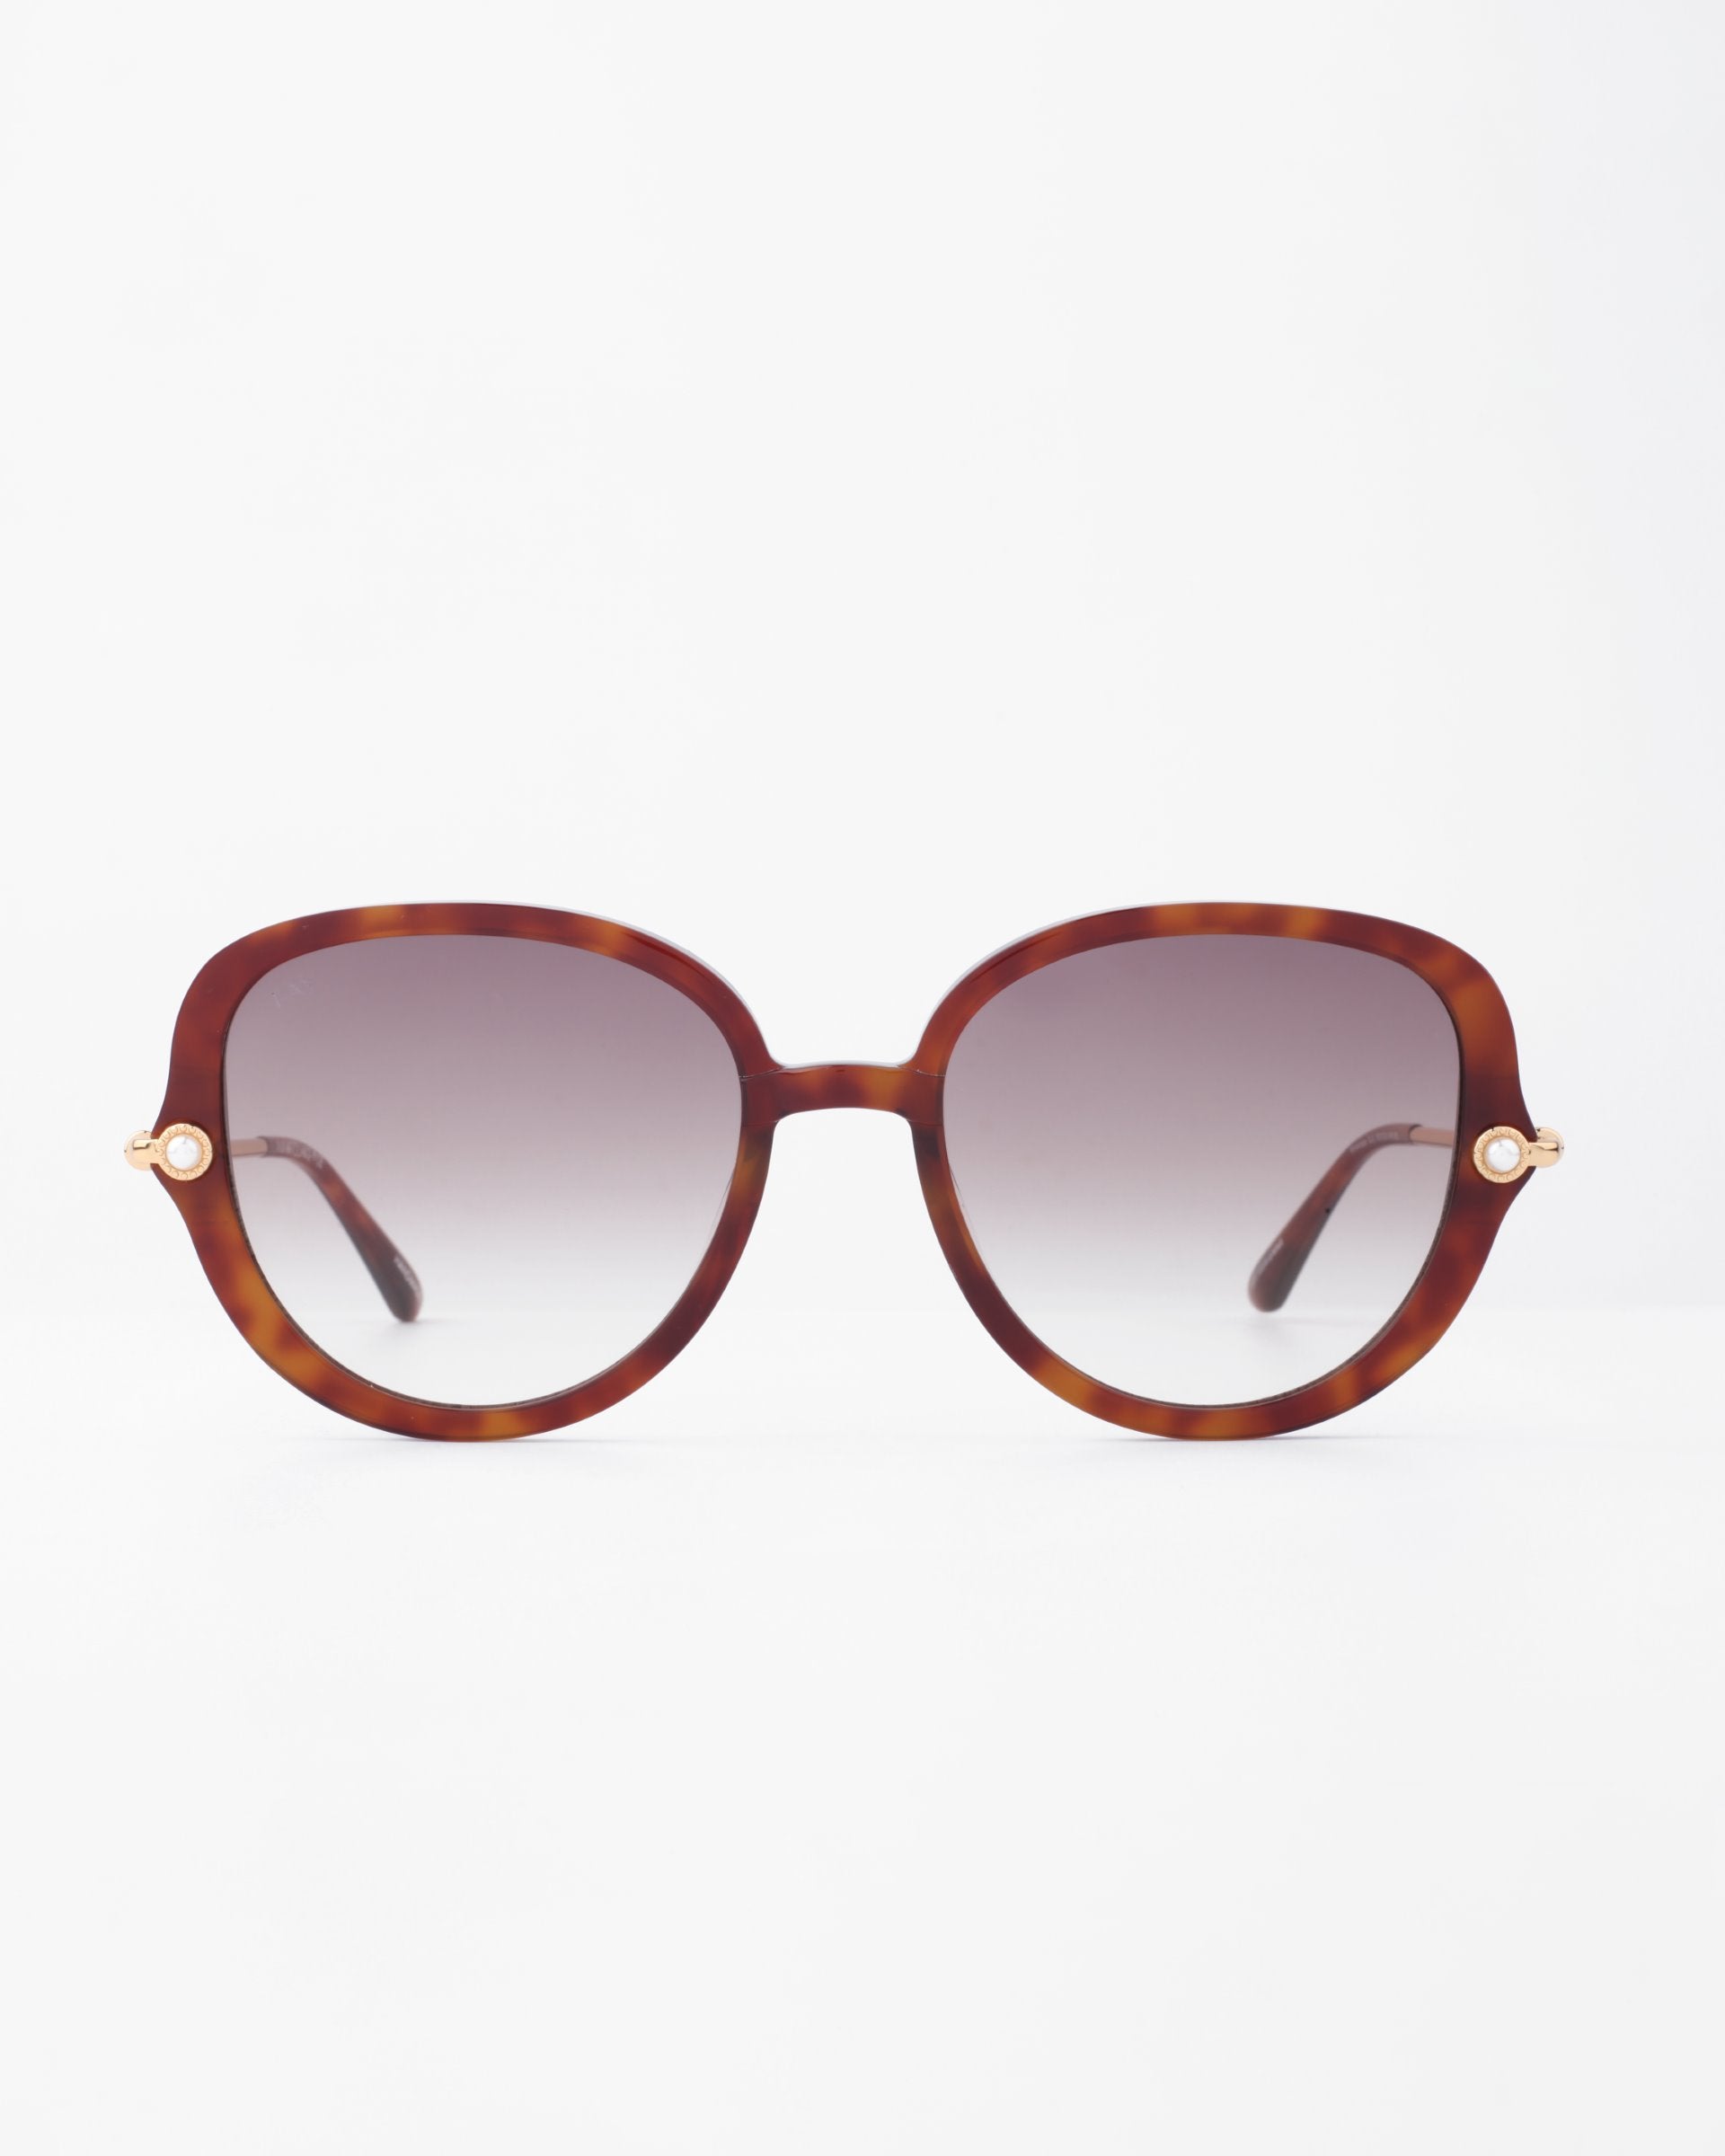 A pair of oversized, square-shaped Primrose sunglasses by For Art&#39;s Sake® with tortoiseshell frames made from plant-based acetate and gradient brown lenses is centered against a plain white background. Small handmade gold-plated accents are visible on the hinges where the temples meet the frame.